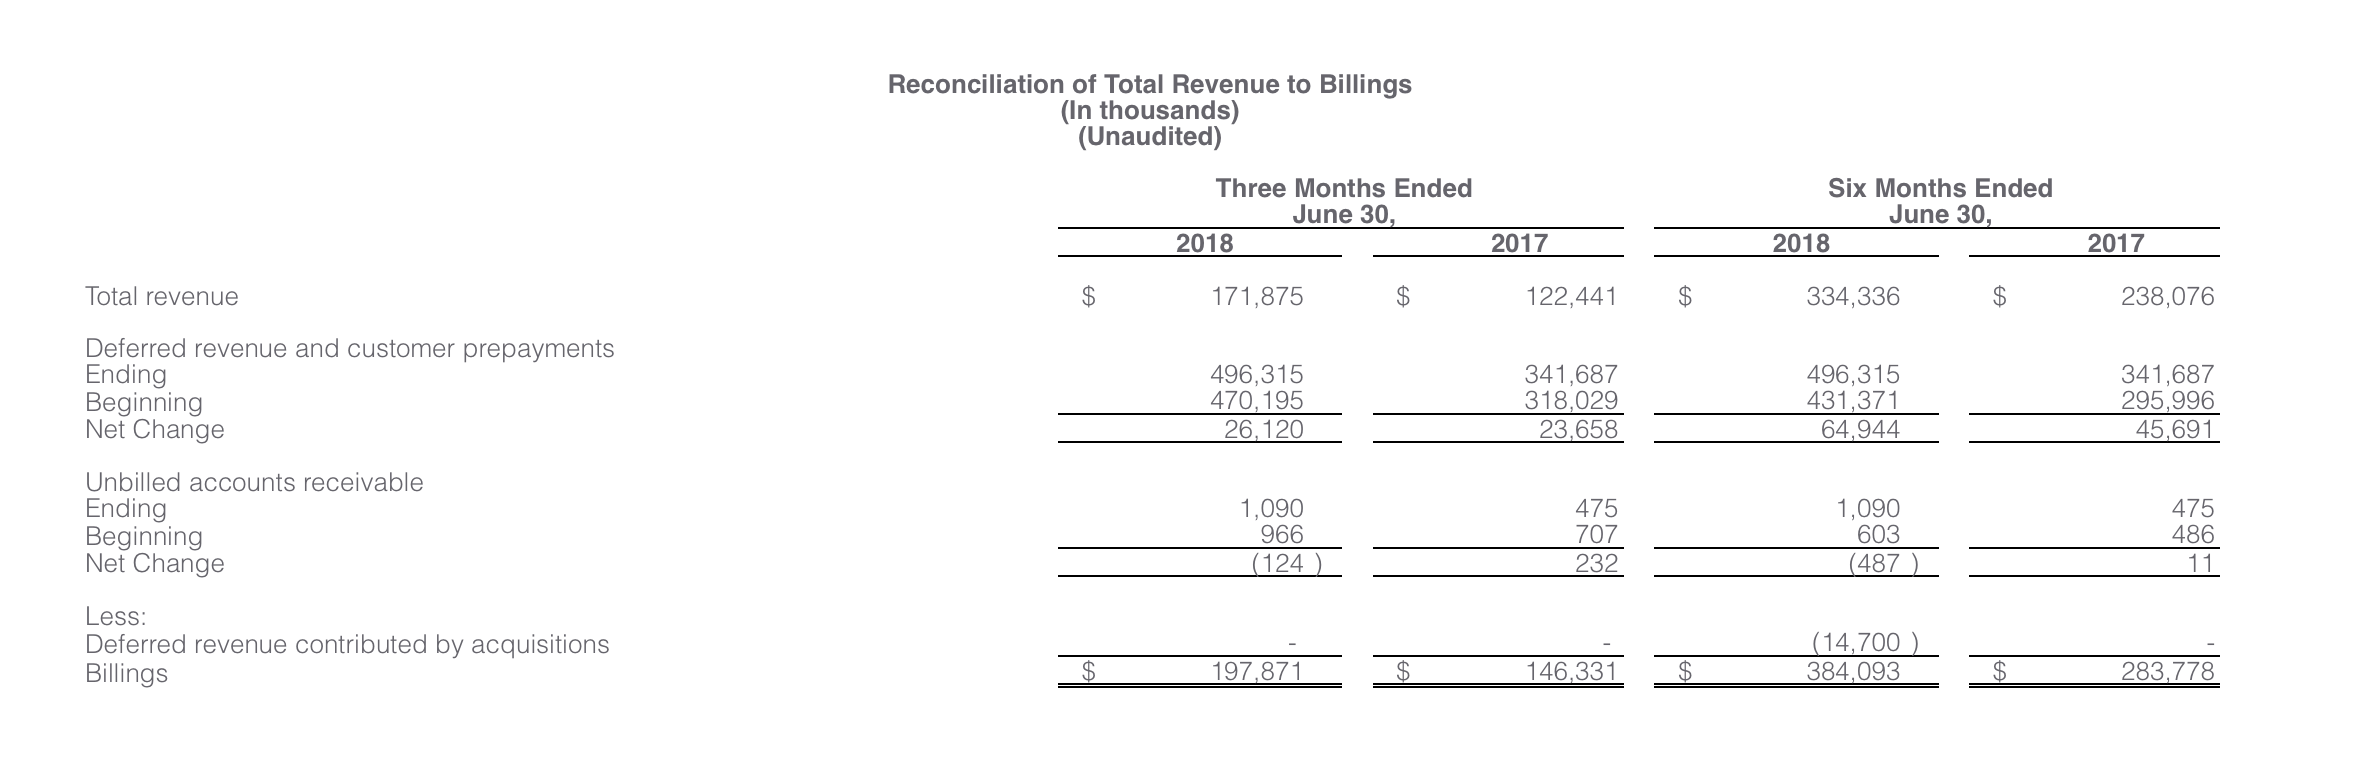 Proofpoint reconciliation of total revenue to billings